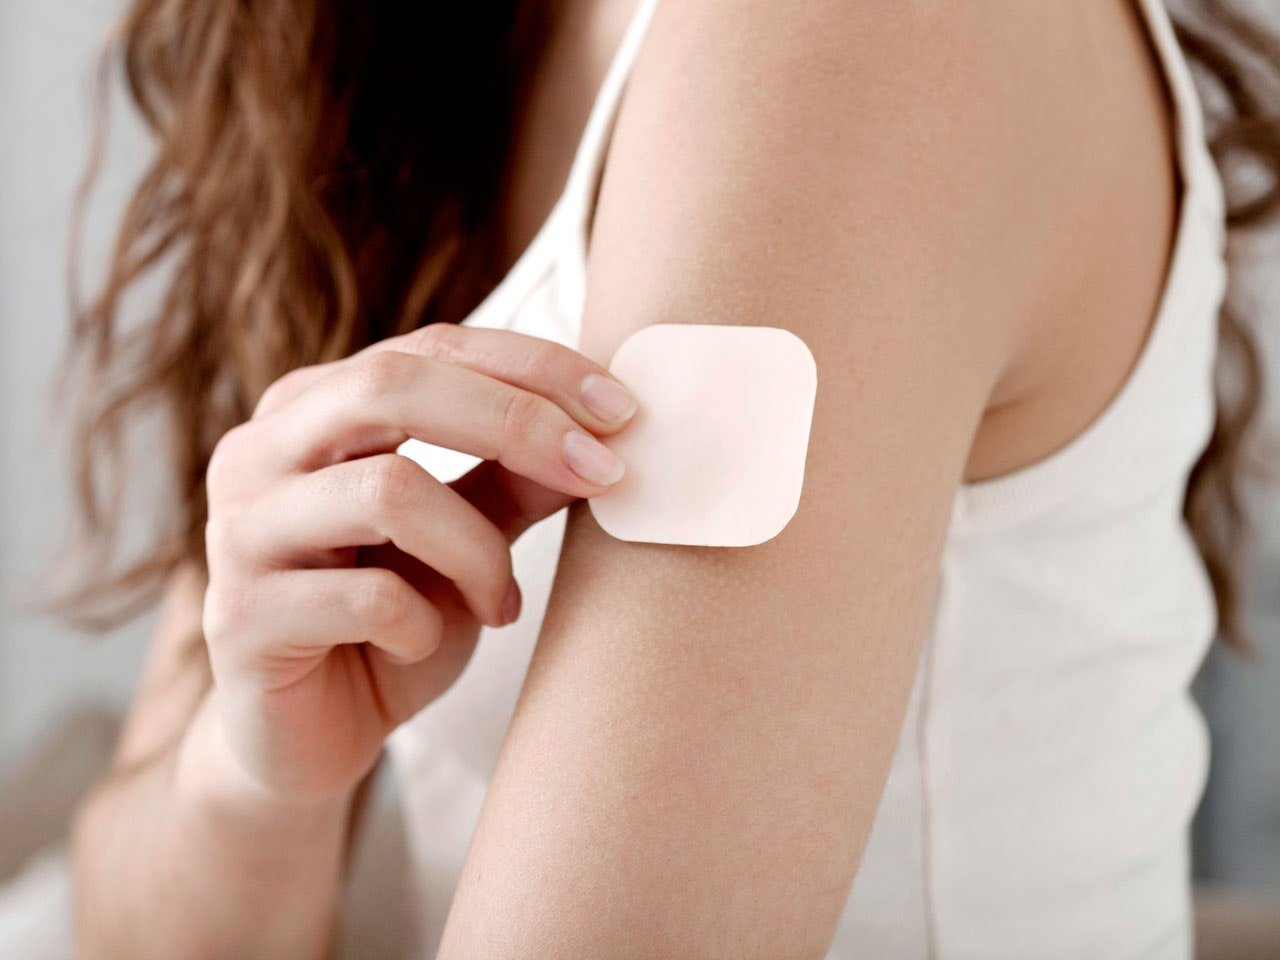 11 Things You Should Know About the Birth Control Patch